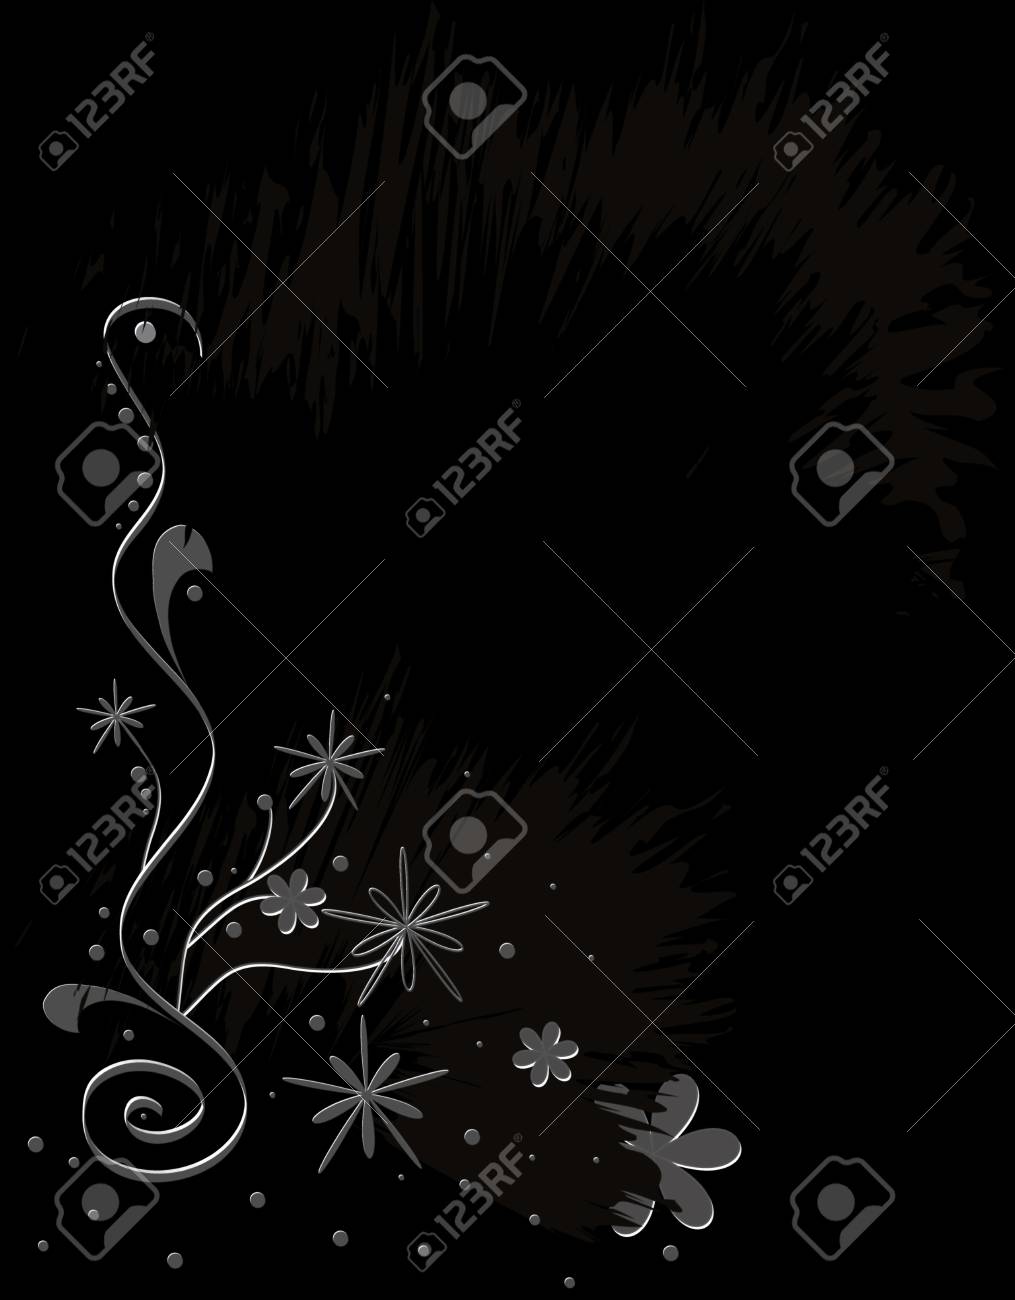 Black Obituaries Mourning Background With Space For Text Stock